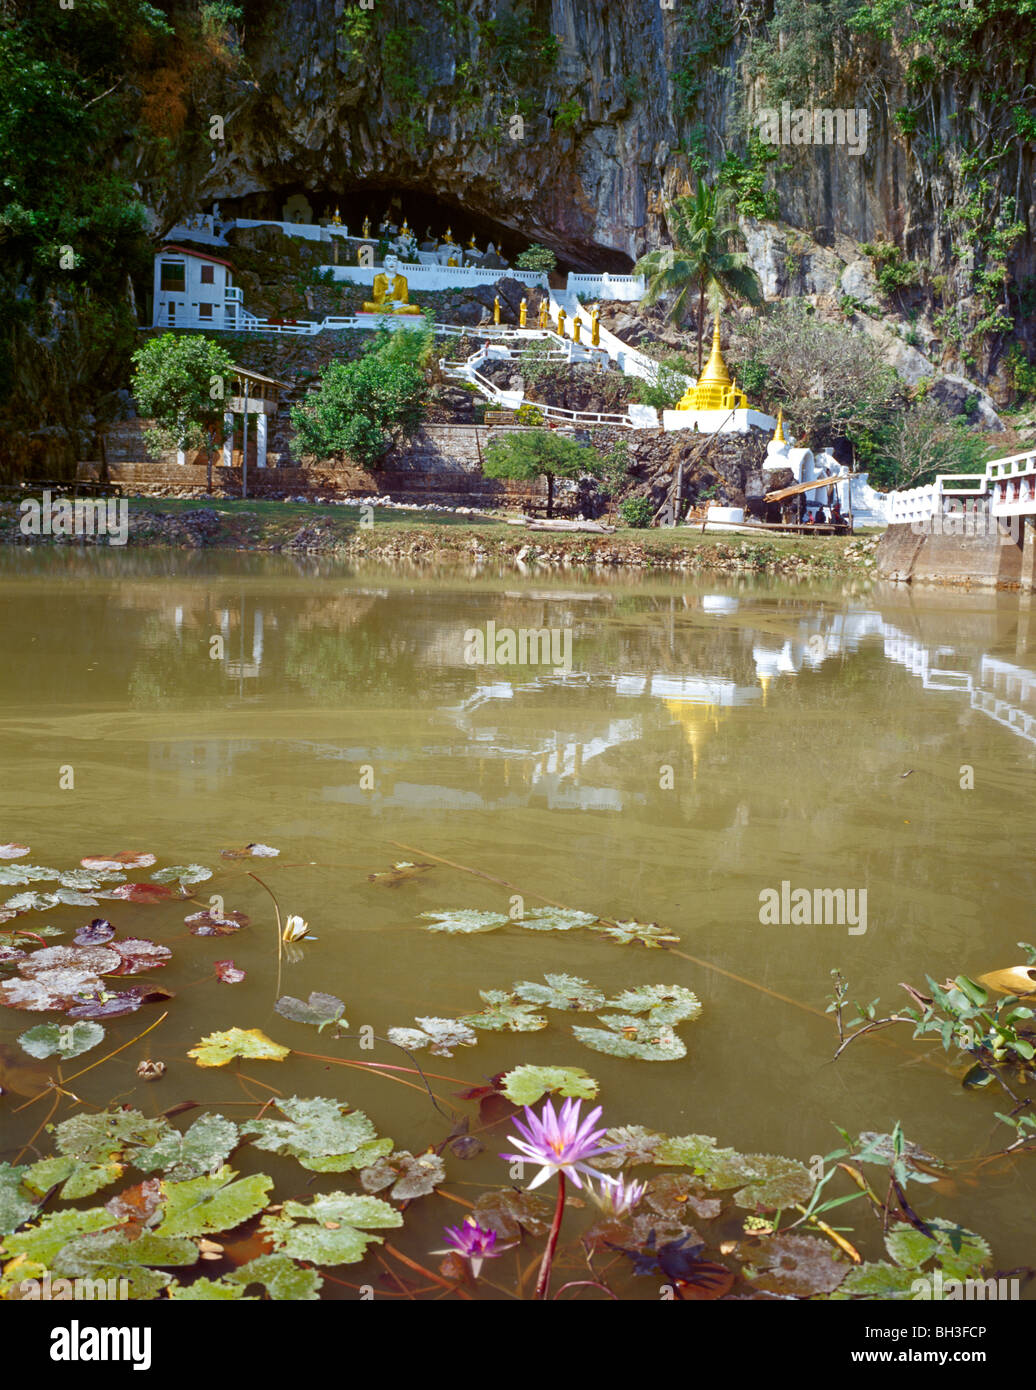 Lake with water  lily  in front of the Yathaypyan Cave Seerosenteich vor der Yathaypyan Höhle Myanmar Burma Stock Photo